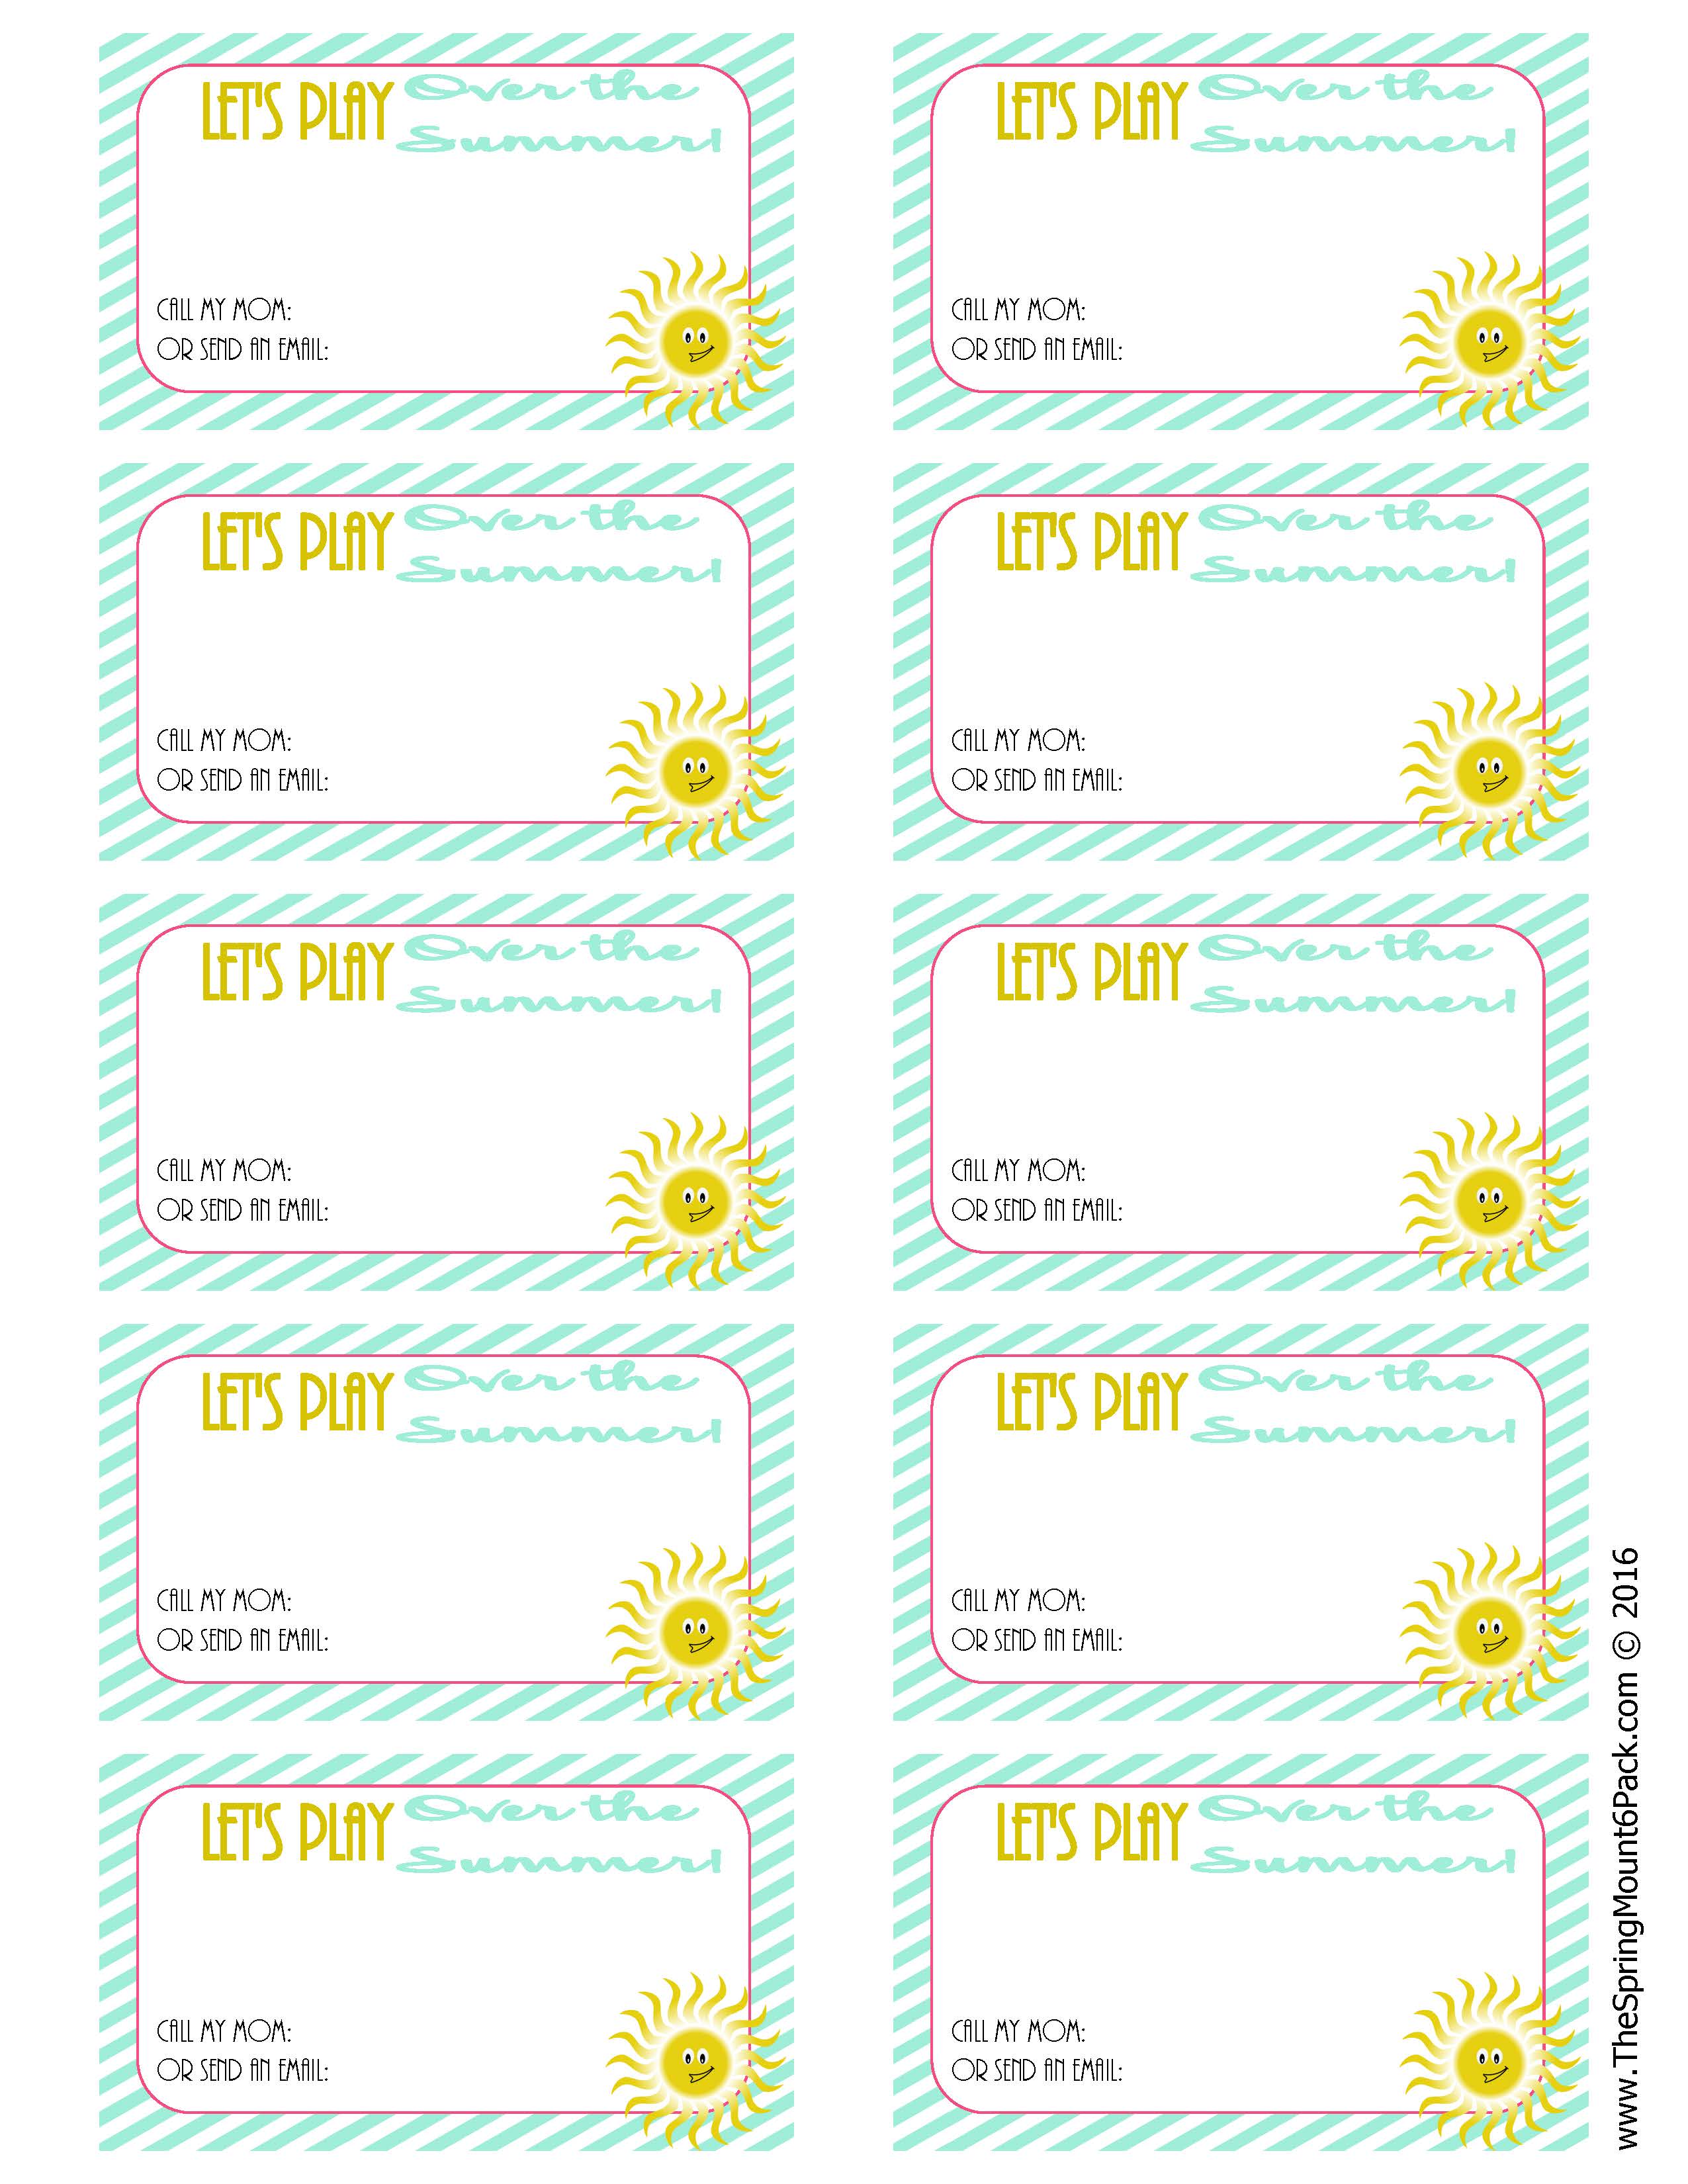 Print out these cards to help kids stay in touch over the summer. 